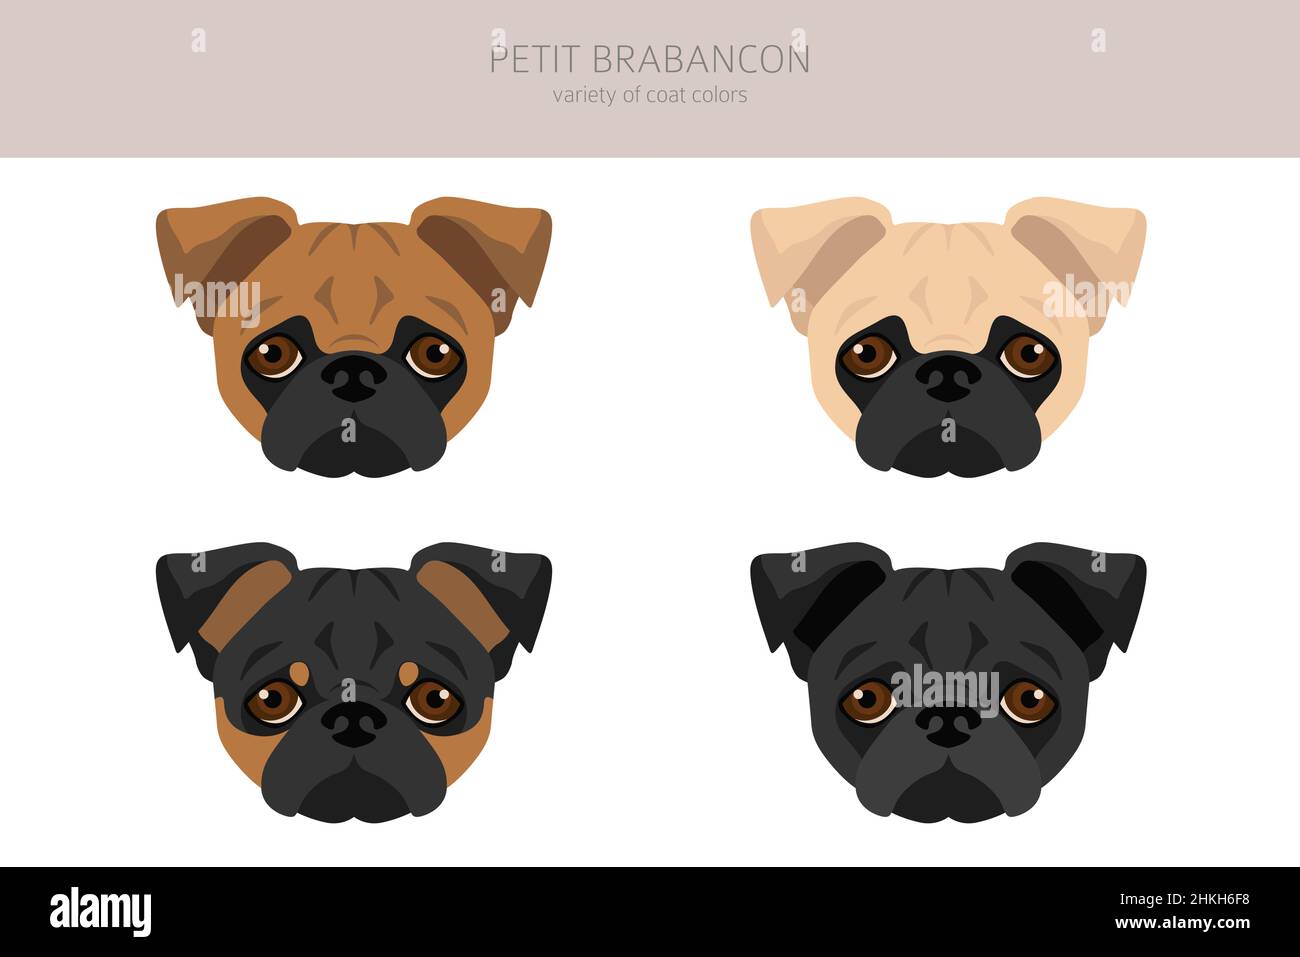 Petit Brabancon, Small Belgian dogs clipart. Different poses, coat colors set.  Vector illustration Stock Vector